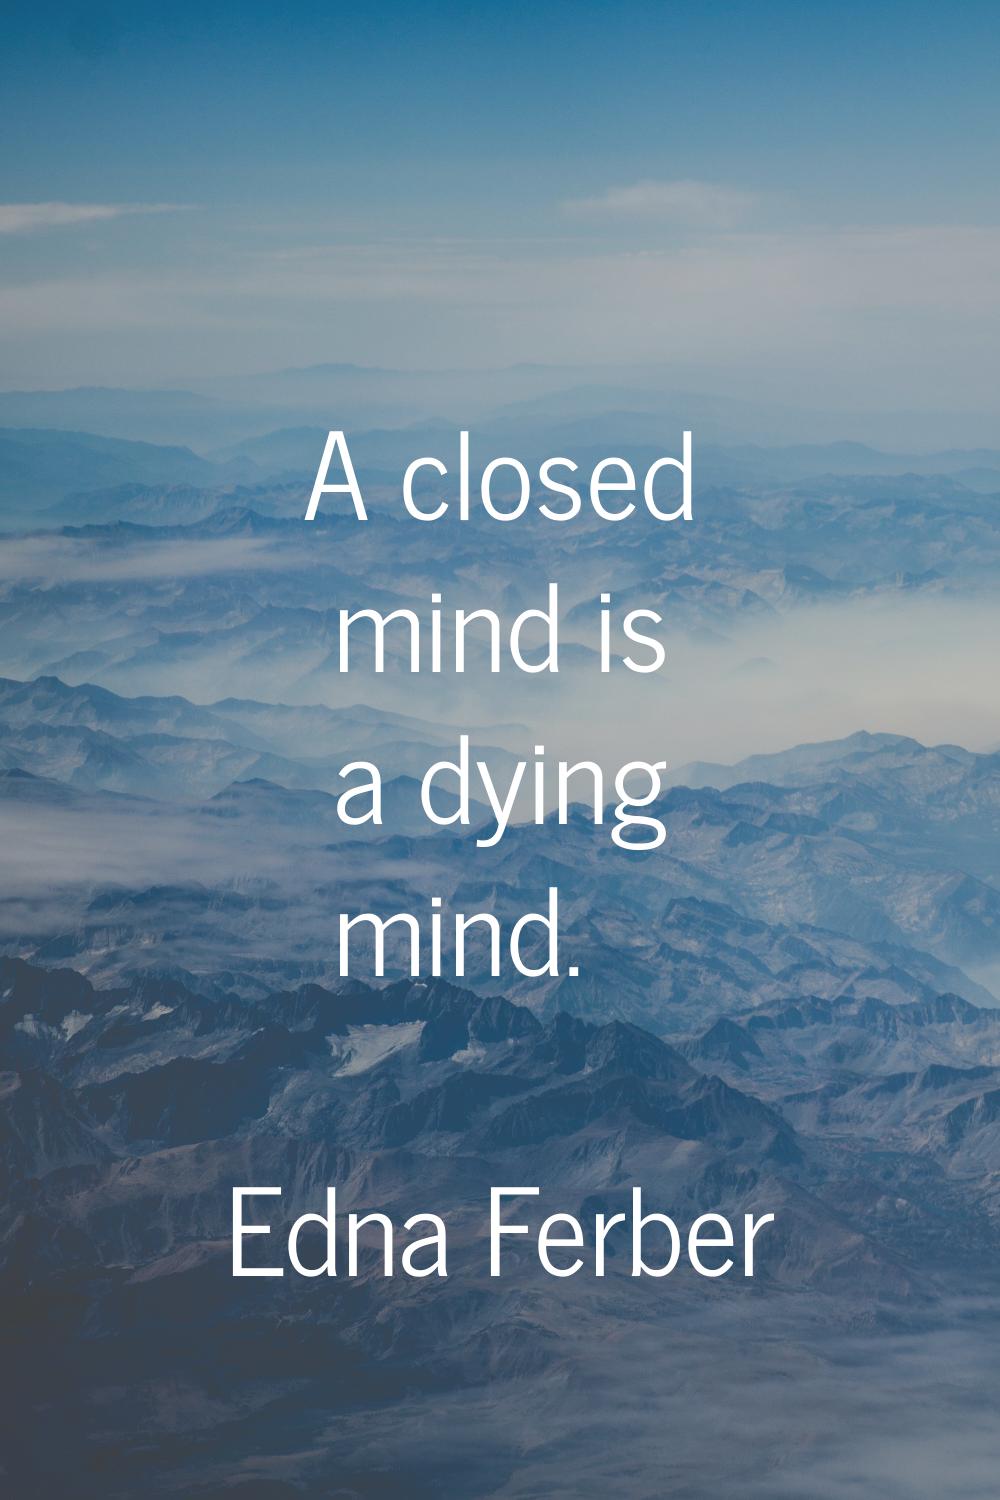 A closed mind is a dying mind.